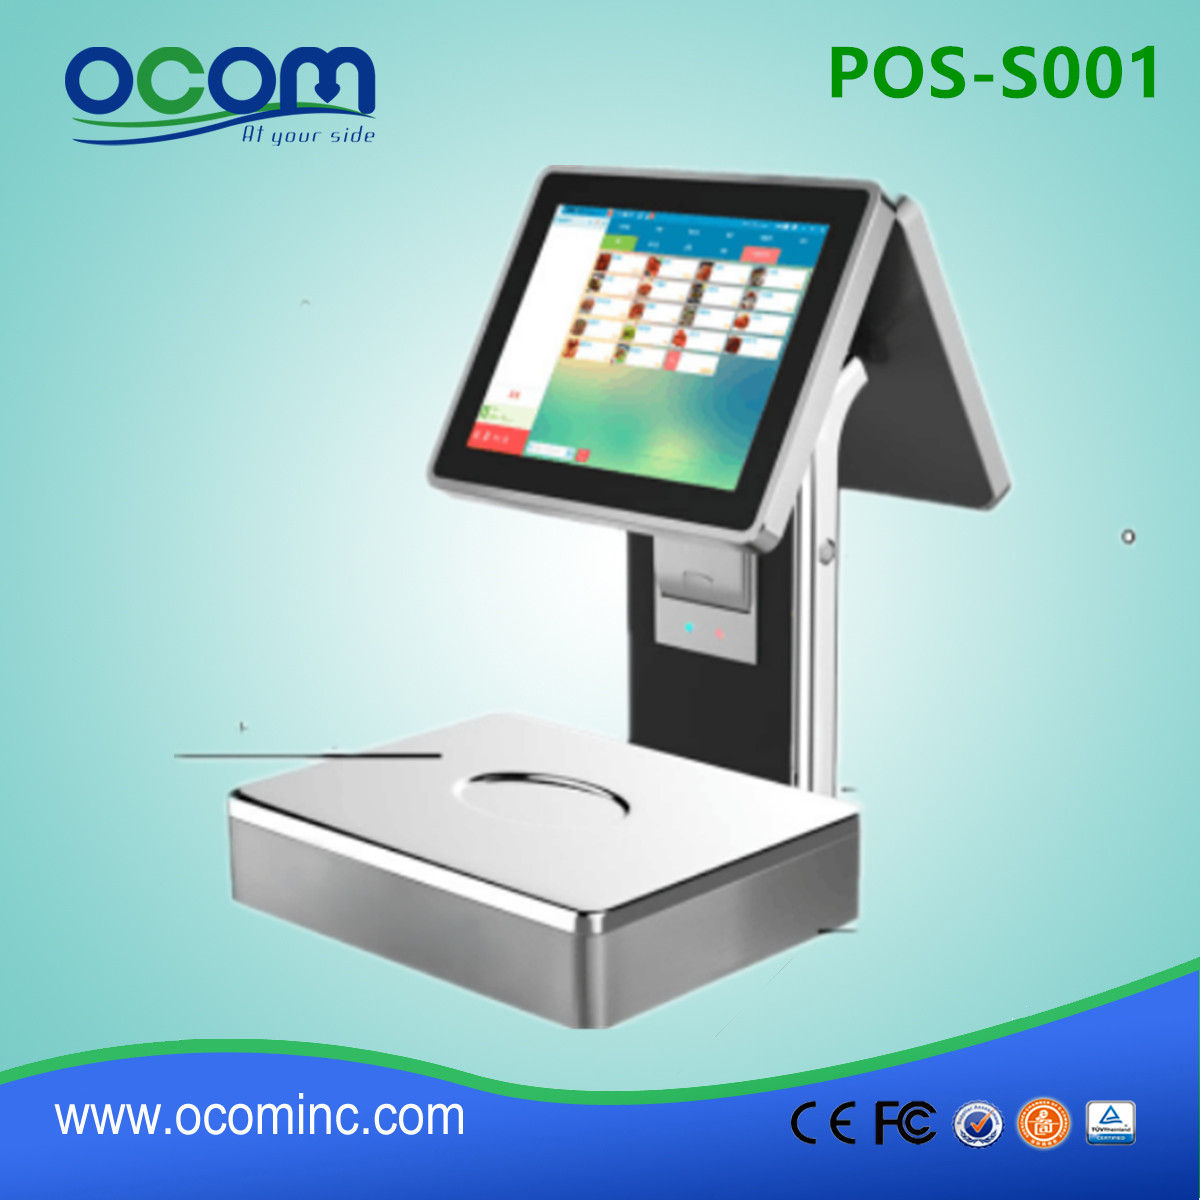 POS-S001-All in one dual screen touch POS Scale with printer built-in